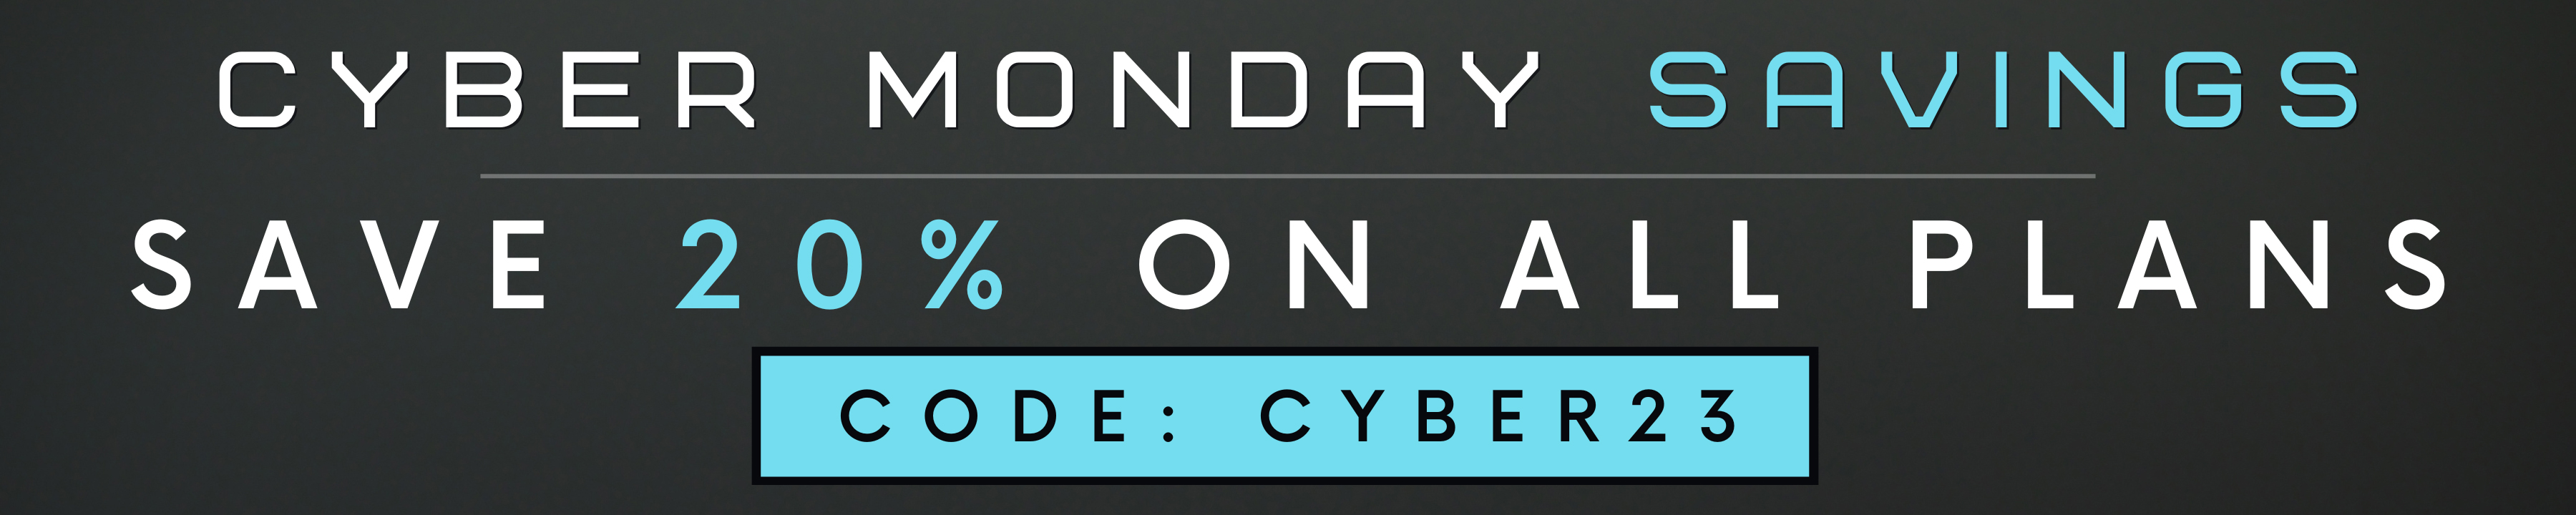 Cyber Monday Savings! | Take 20% Off ALL House Plans | Code: CYBER23